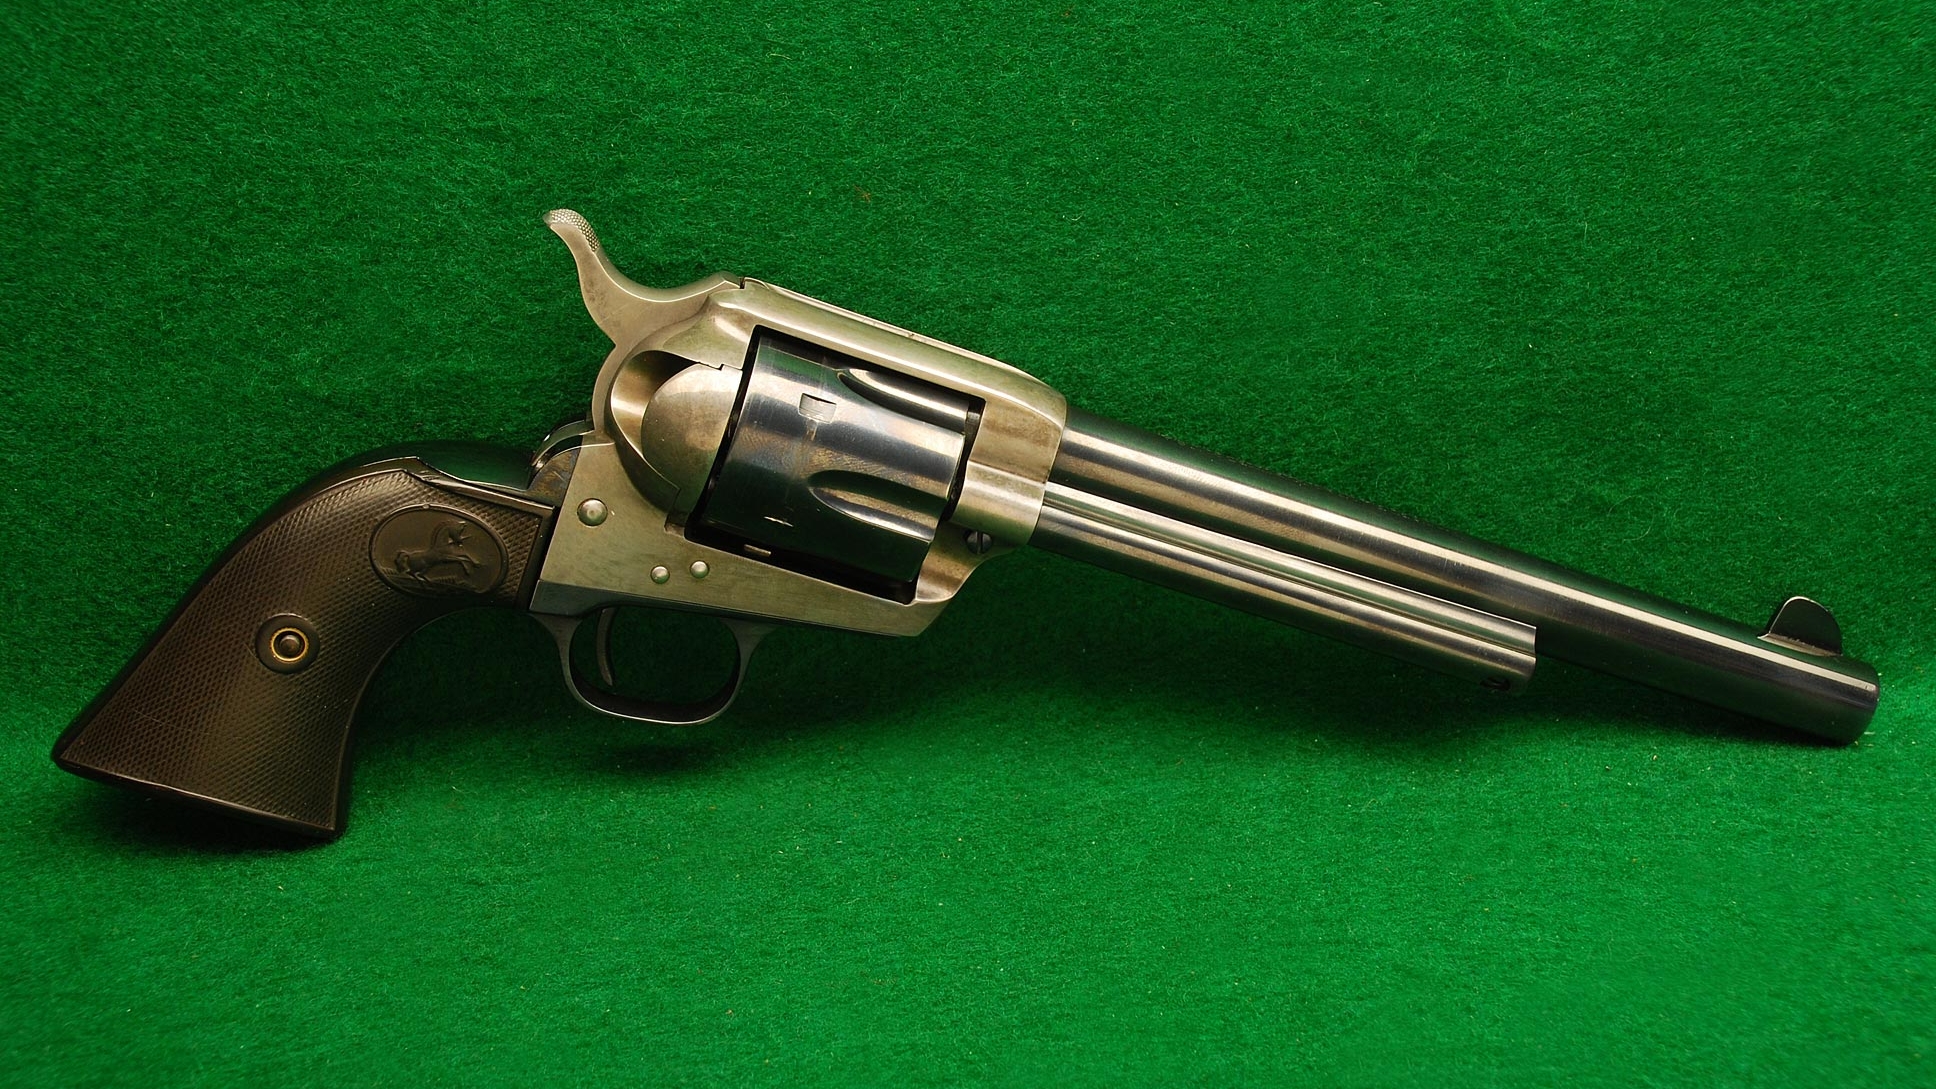 colt revolver, weapons